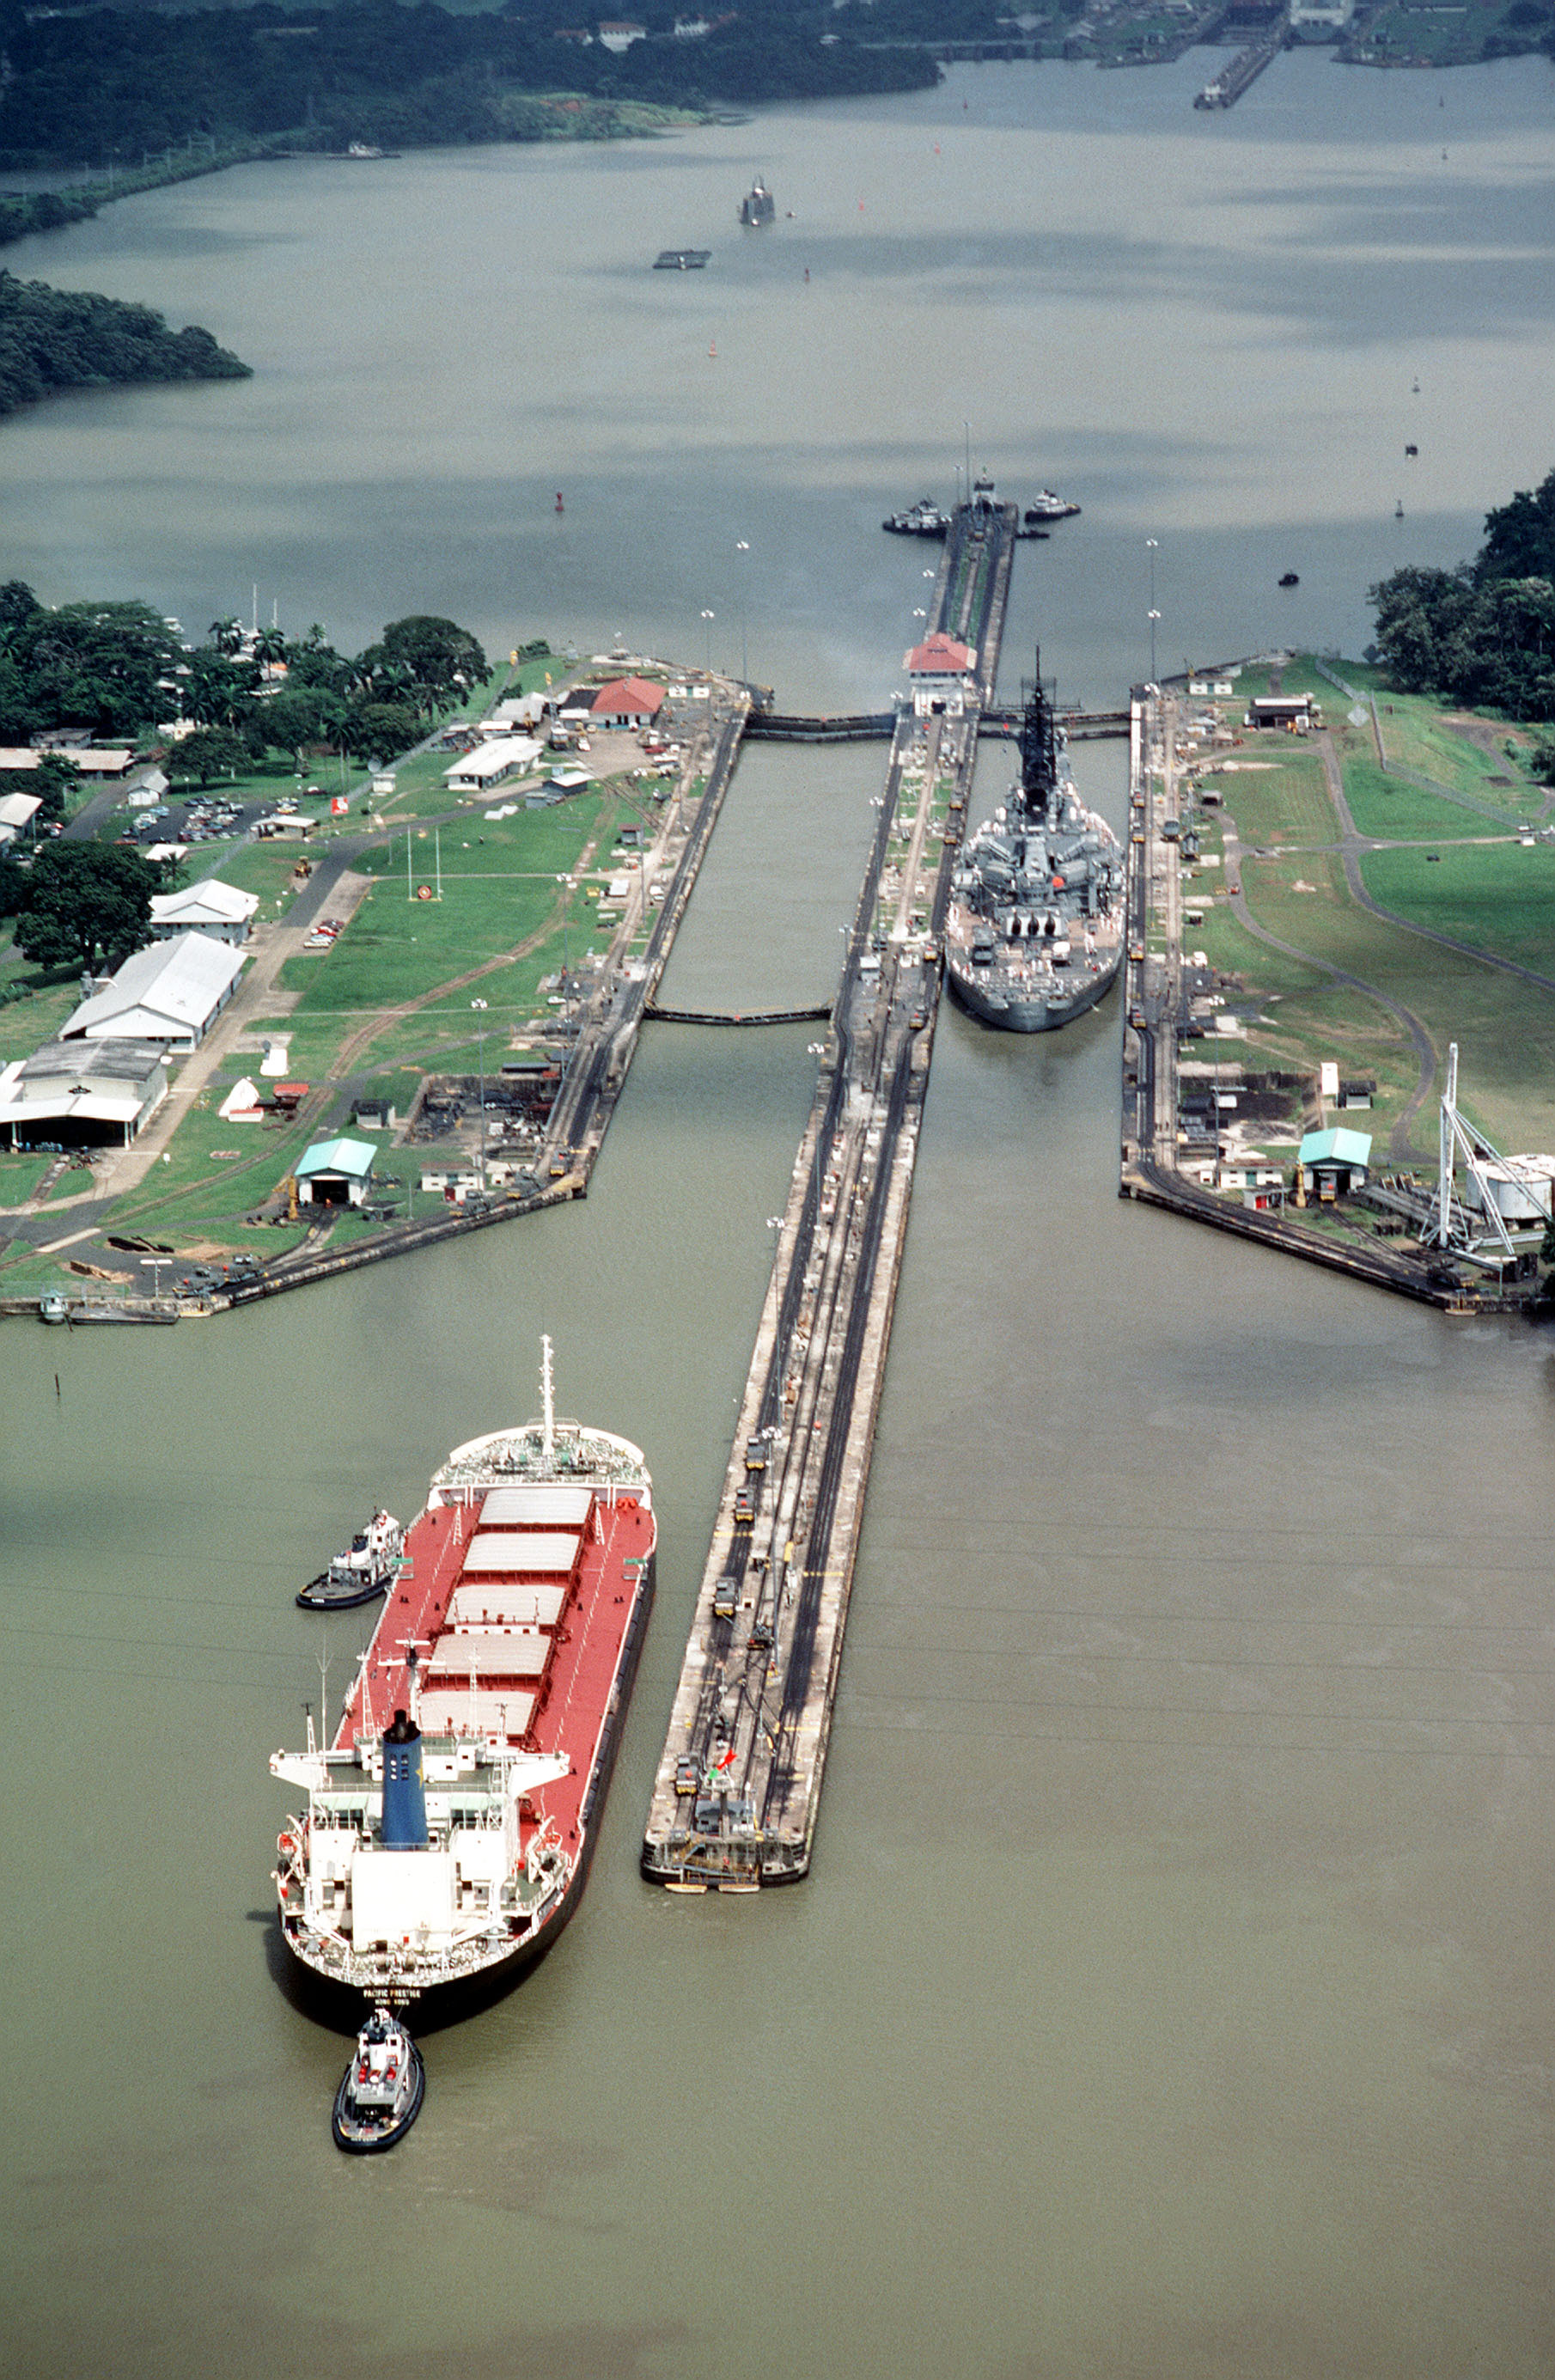 USS Iowa in the Pedro Miguel lock of the Panama Canal, 6 Aug 1984